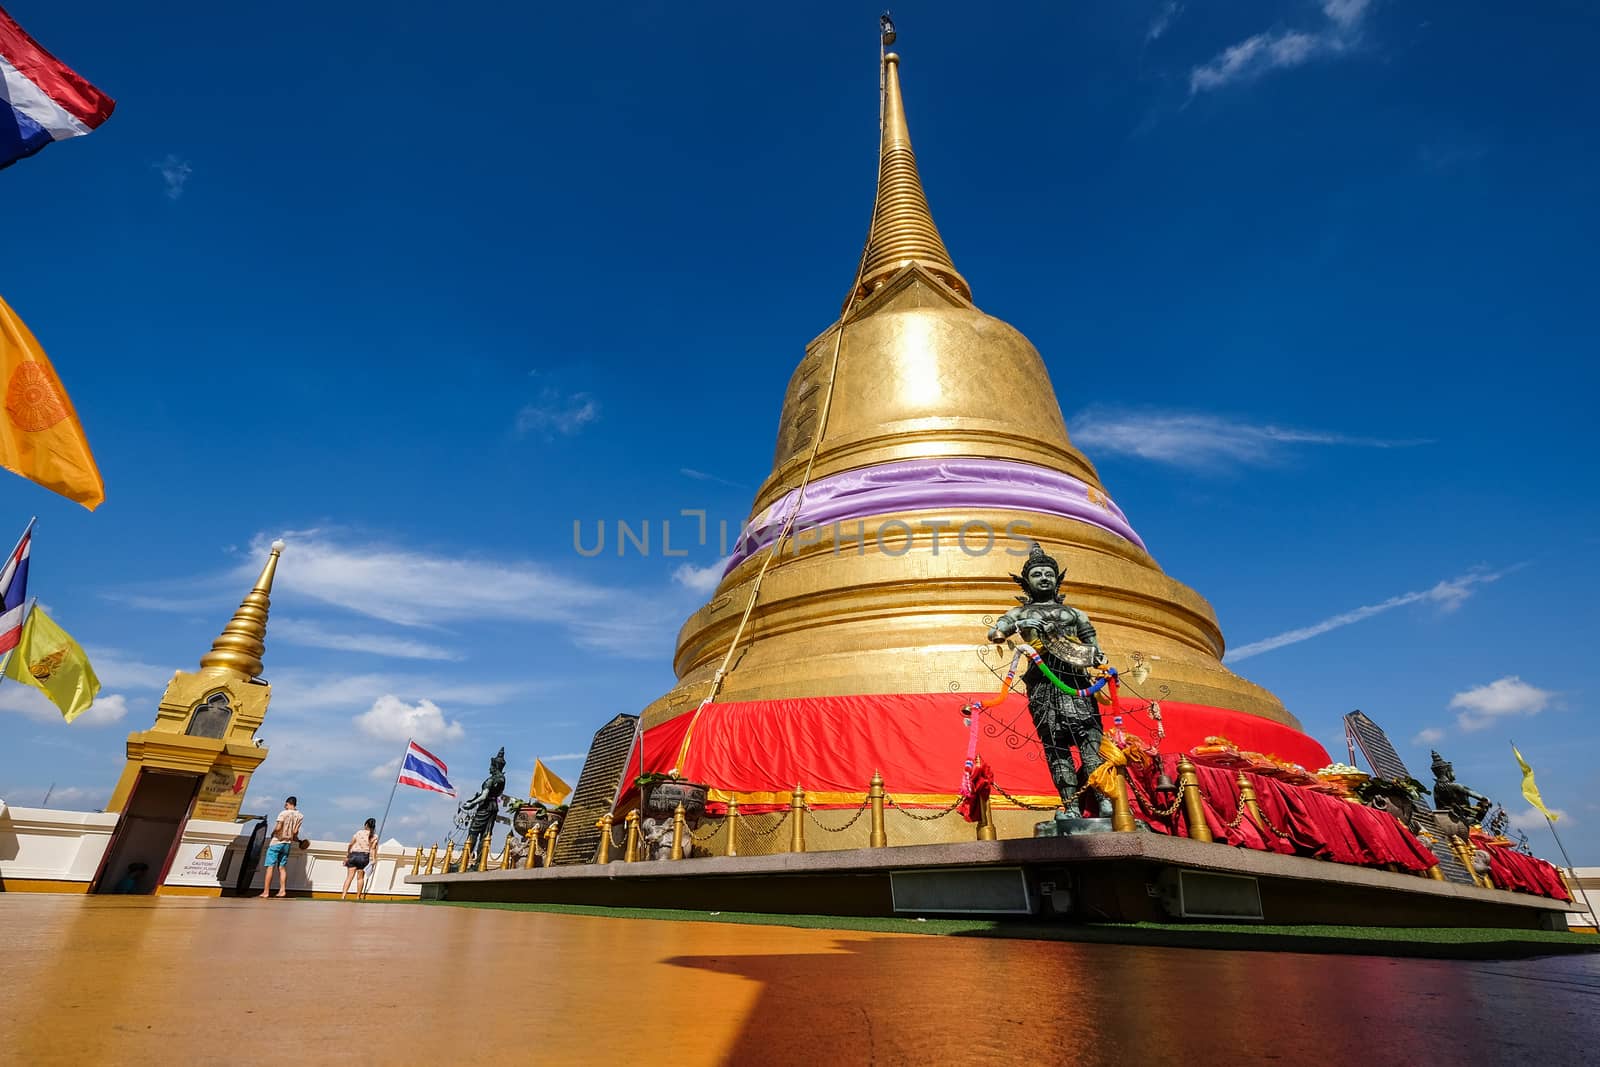 Gold moutain temple and blue sky in bangkok ,Thailand by Surasak